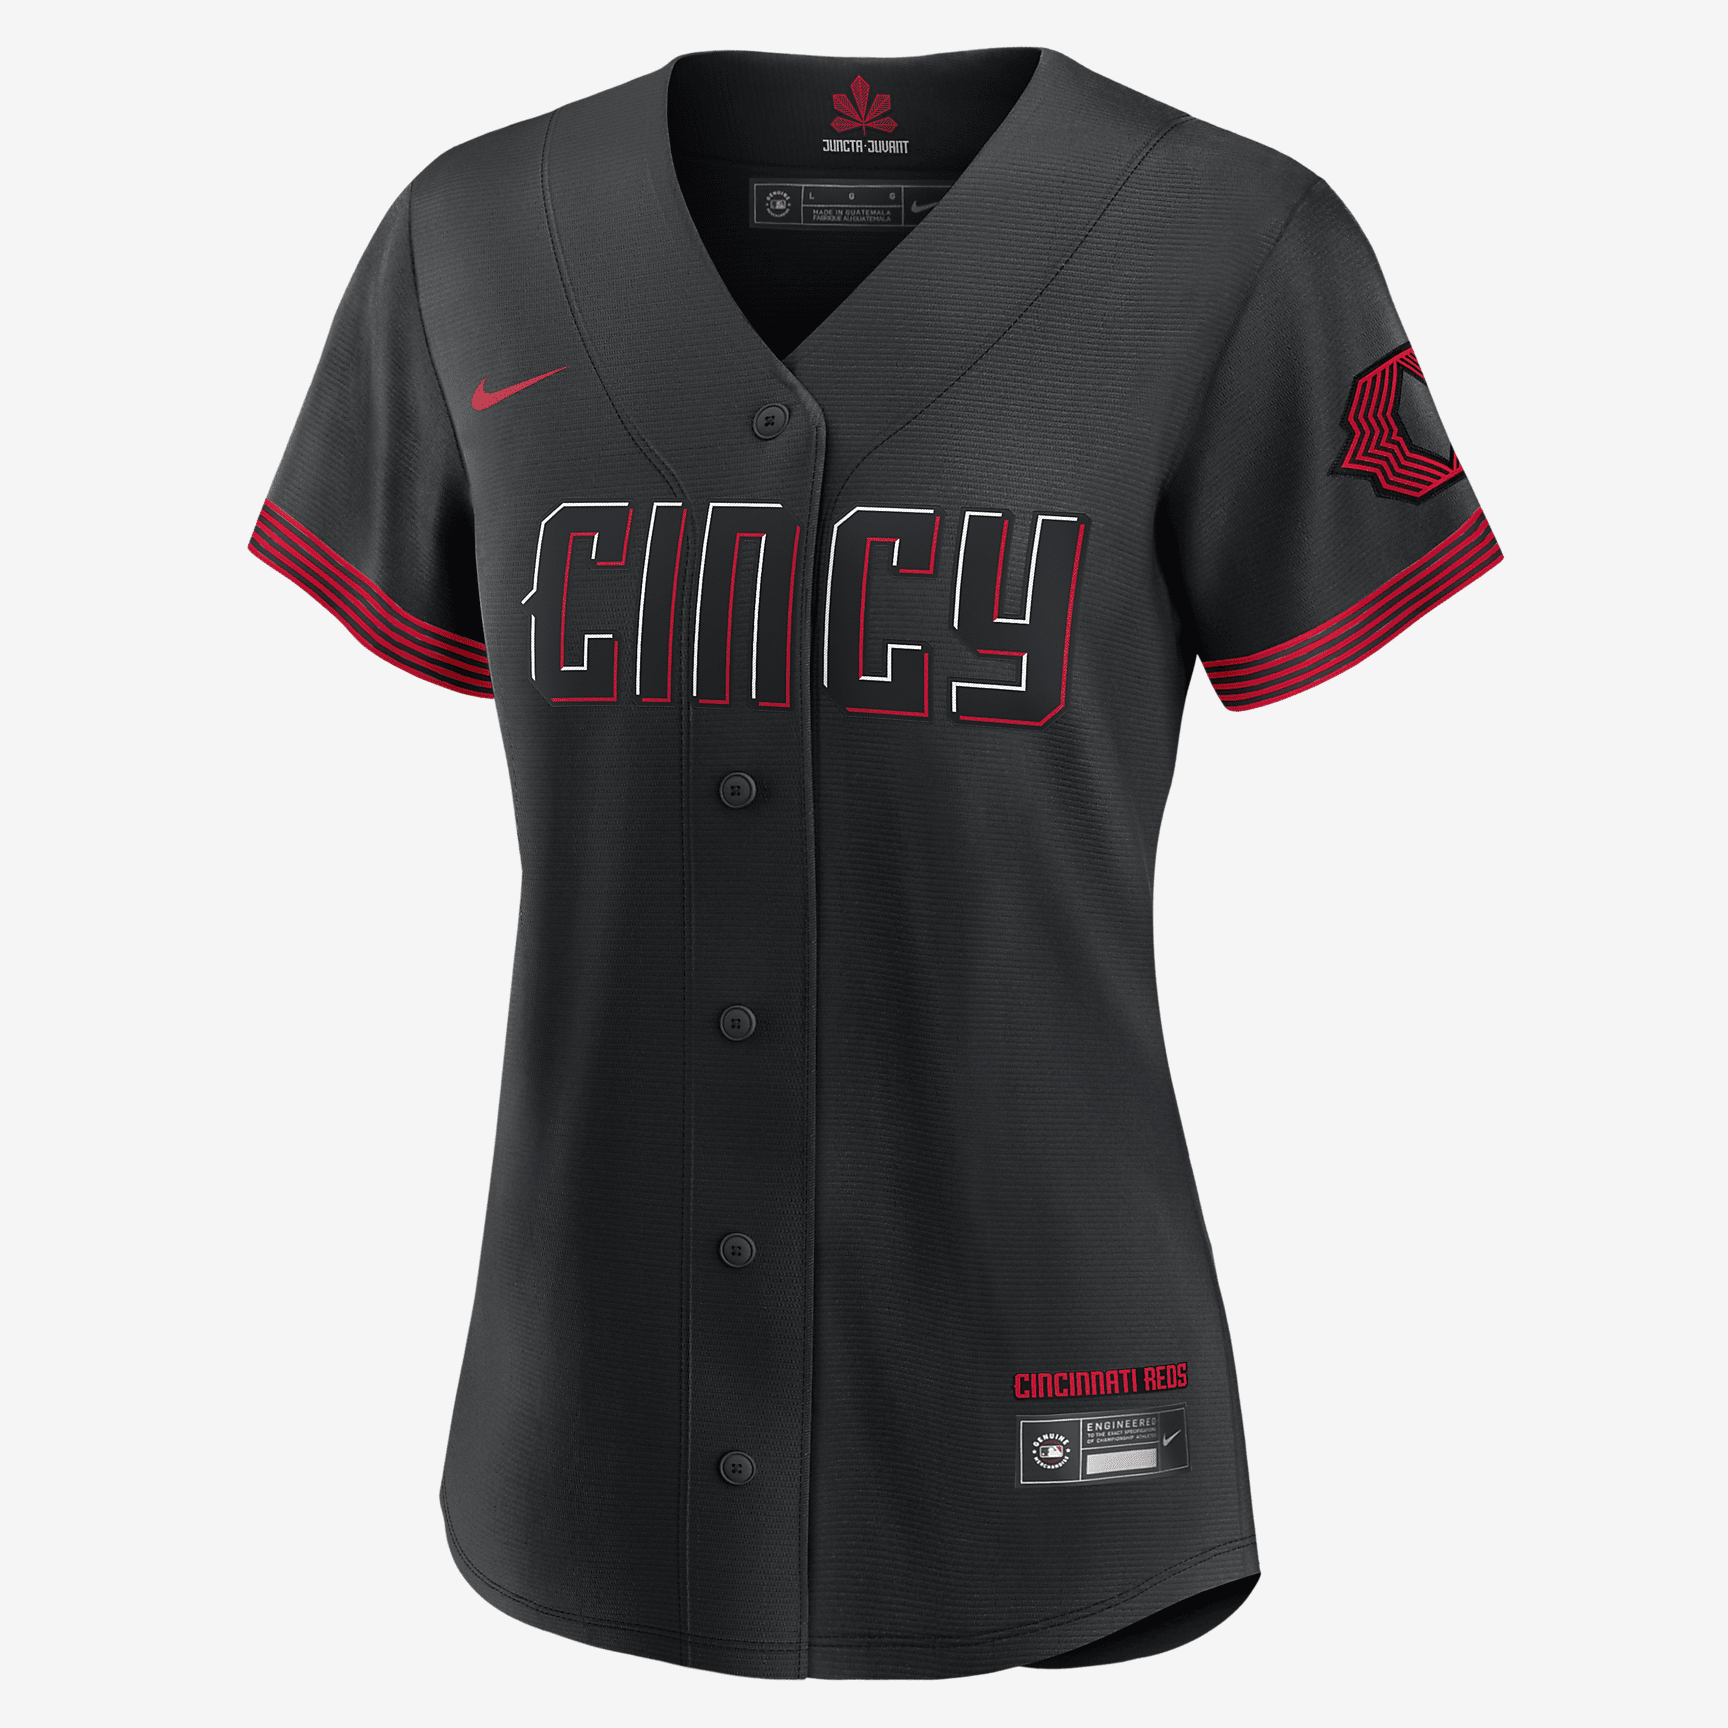 Reds City Connect Jerseys : r/Reds